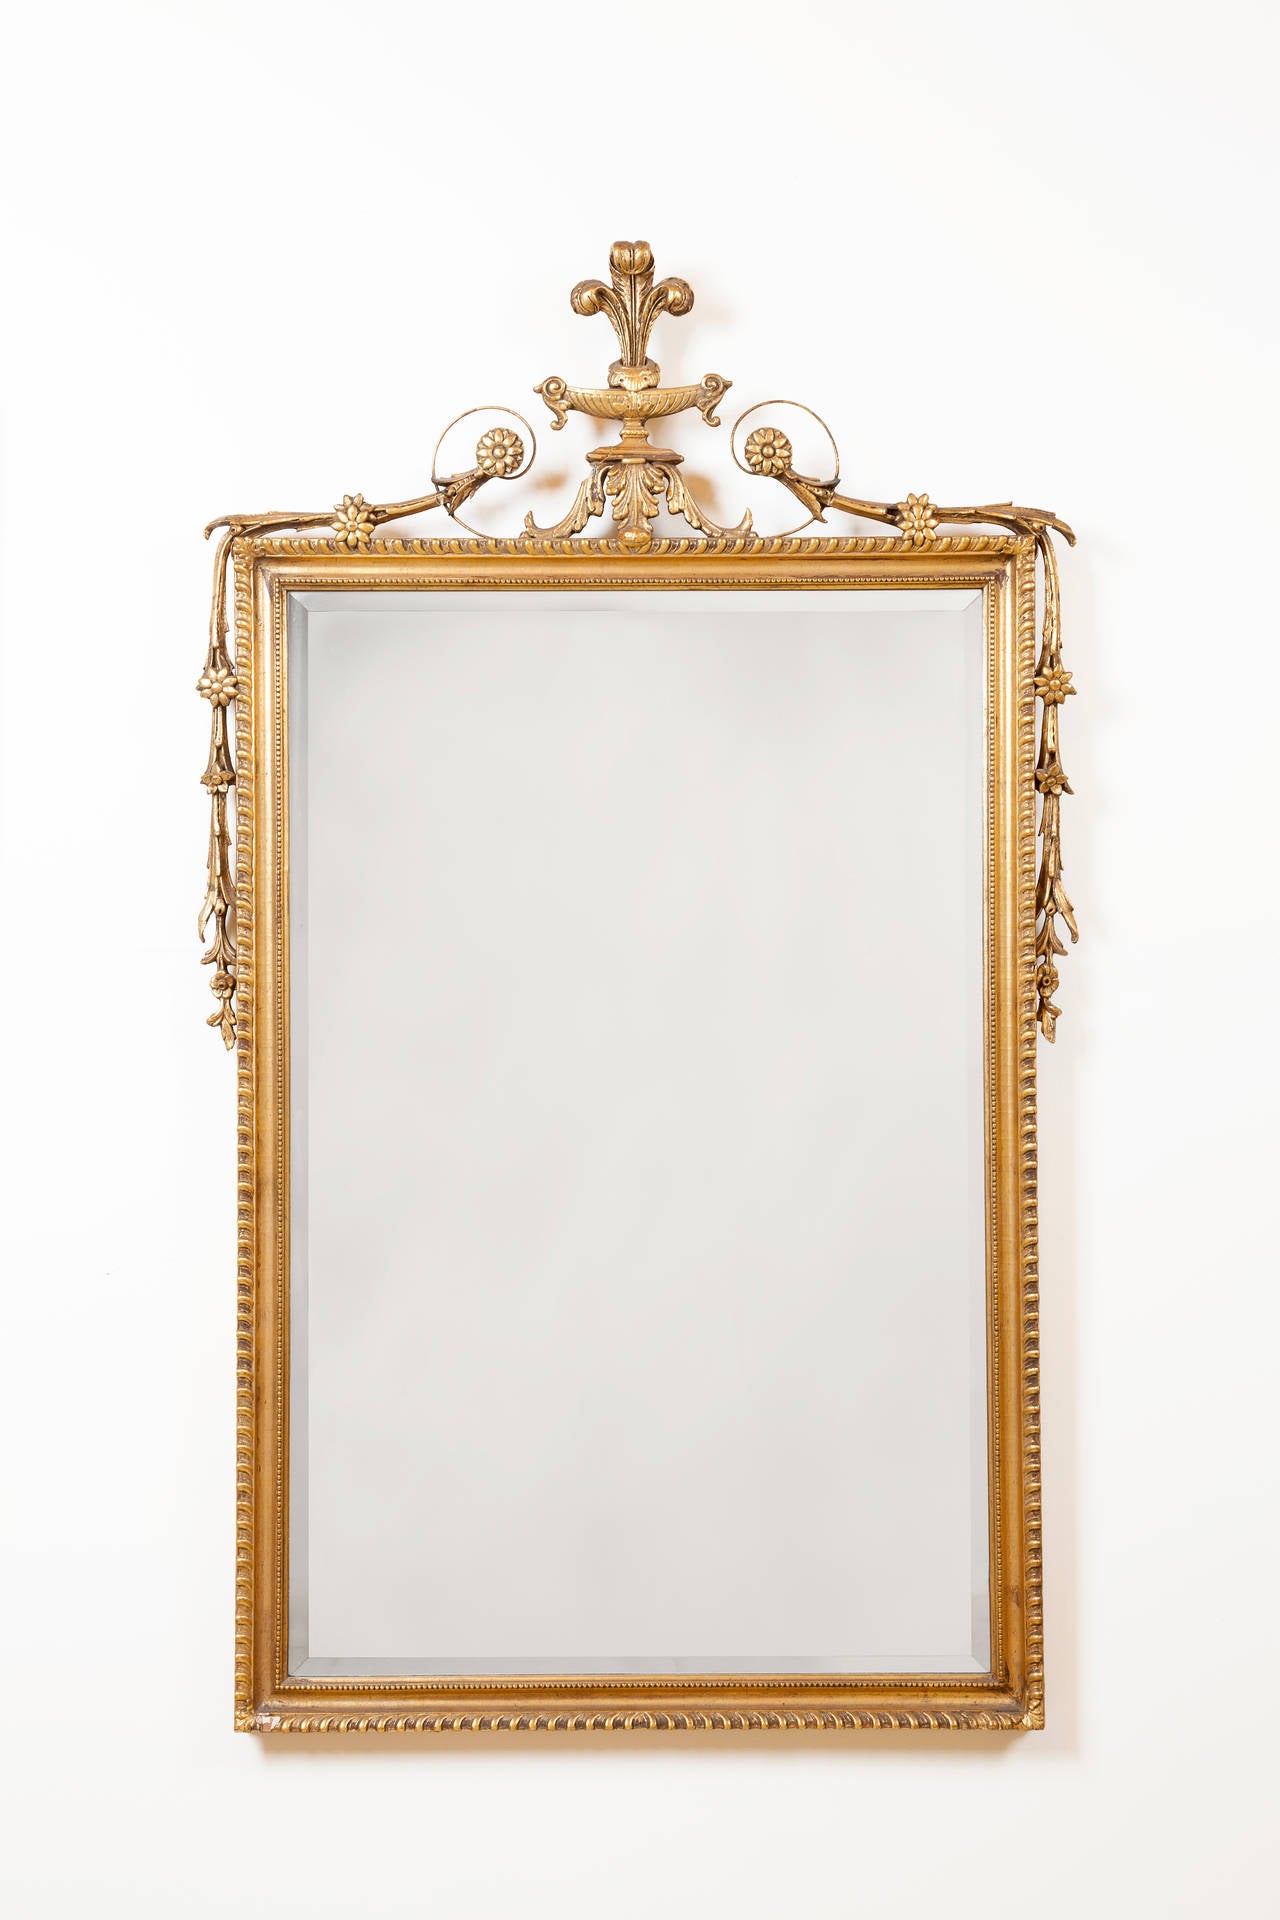 19th century English giltwood mirror with Prince of Wales feathers at top and carved rosettes and foliage bordering the frame. Adam style.